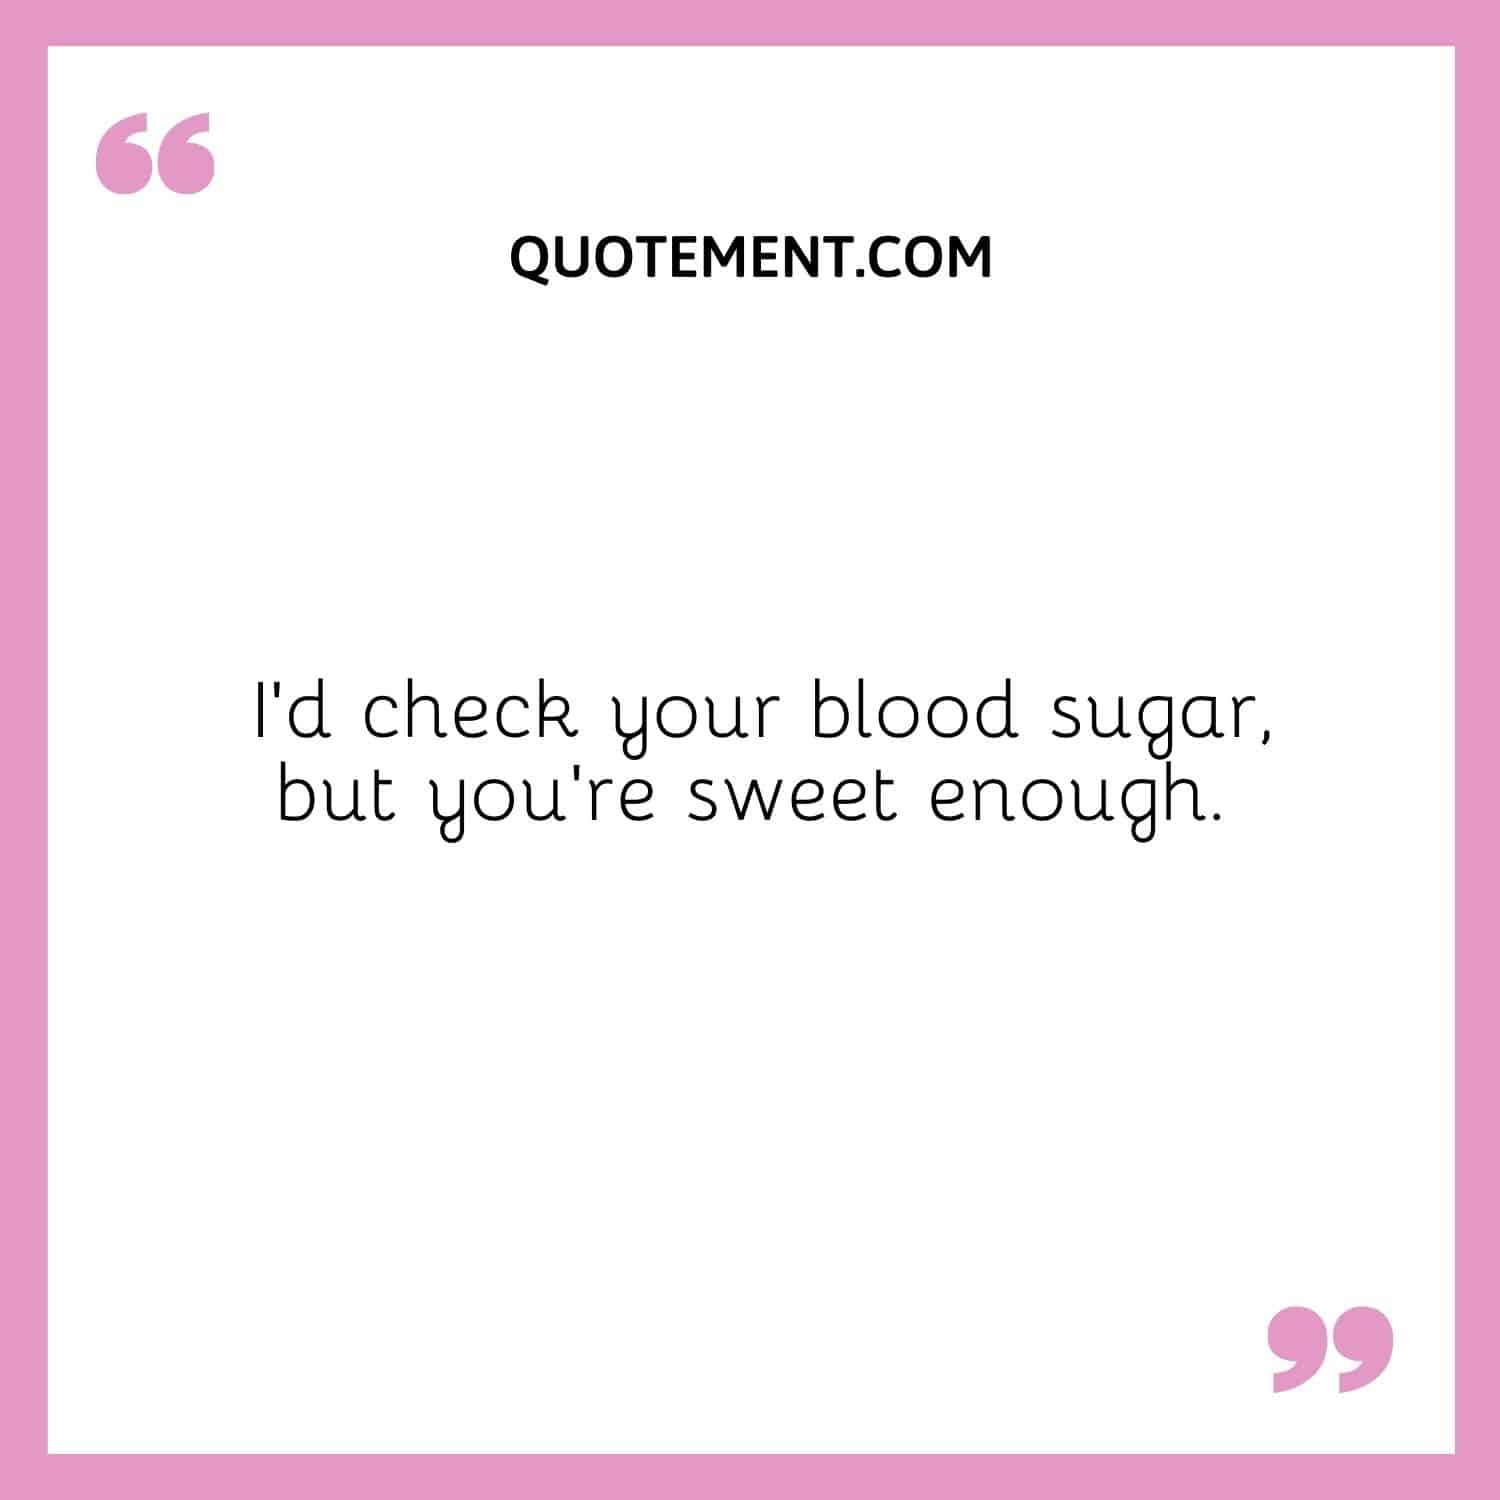 I’d check your blood sugar, but you’re sweet enough.